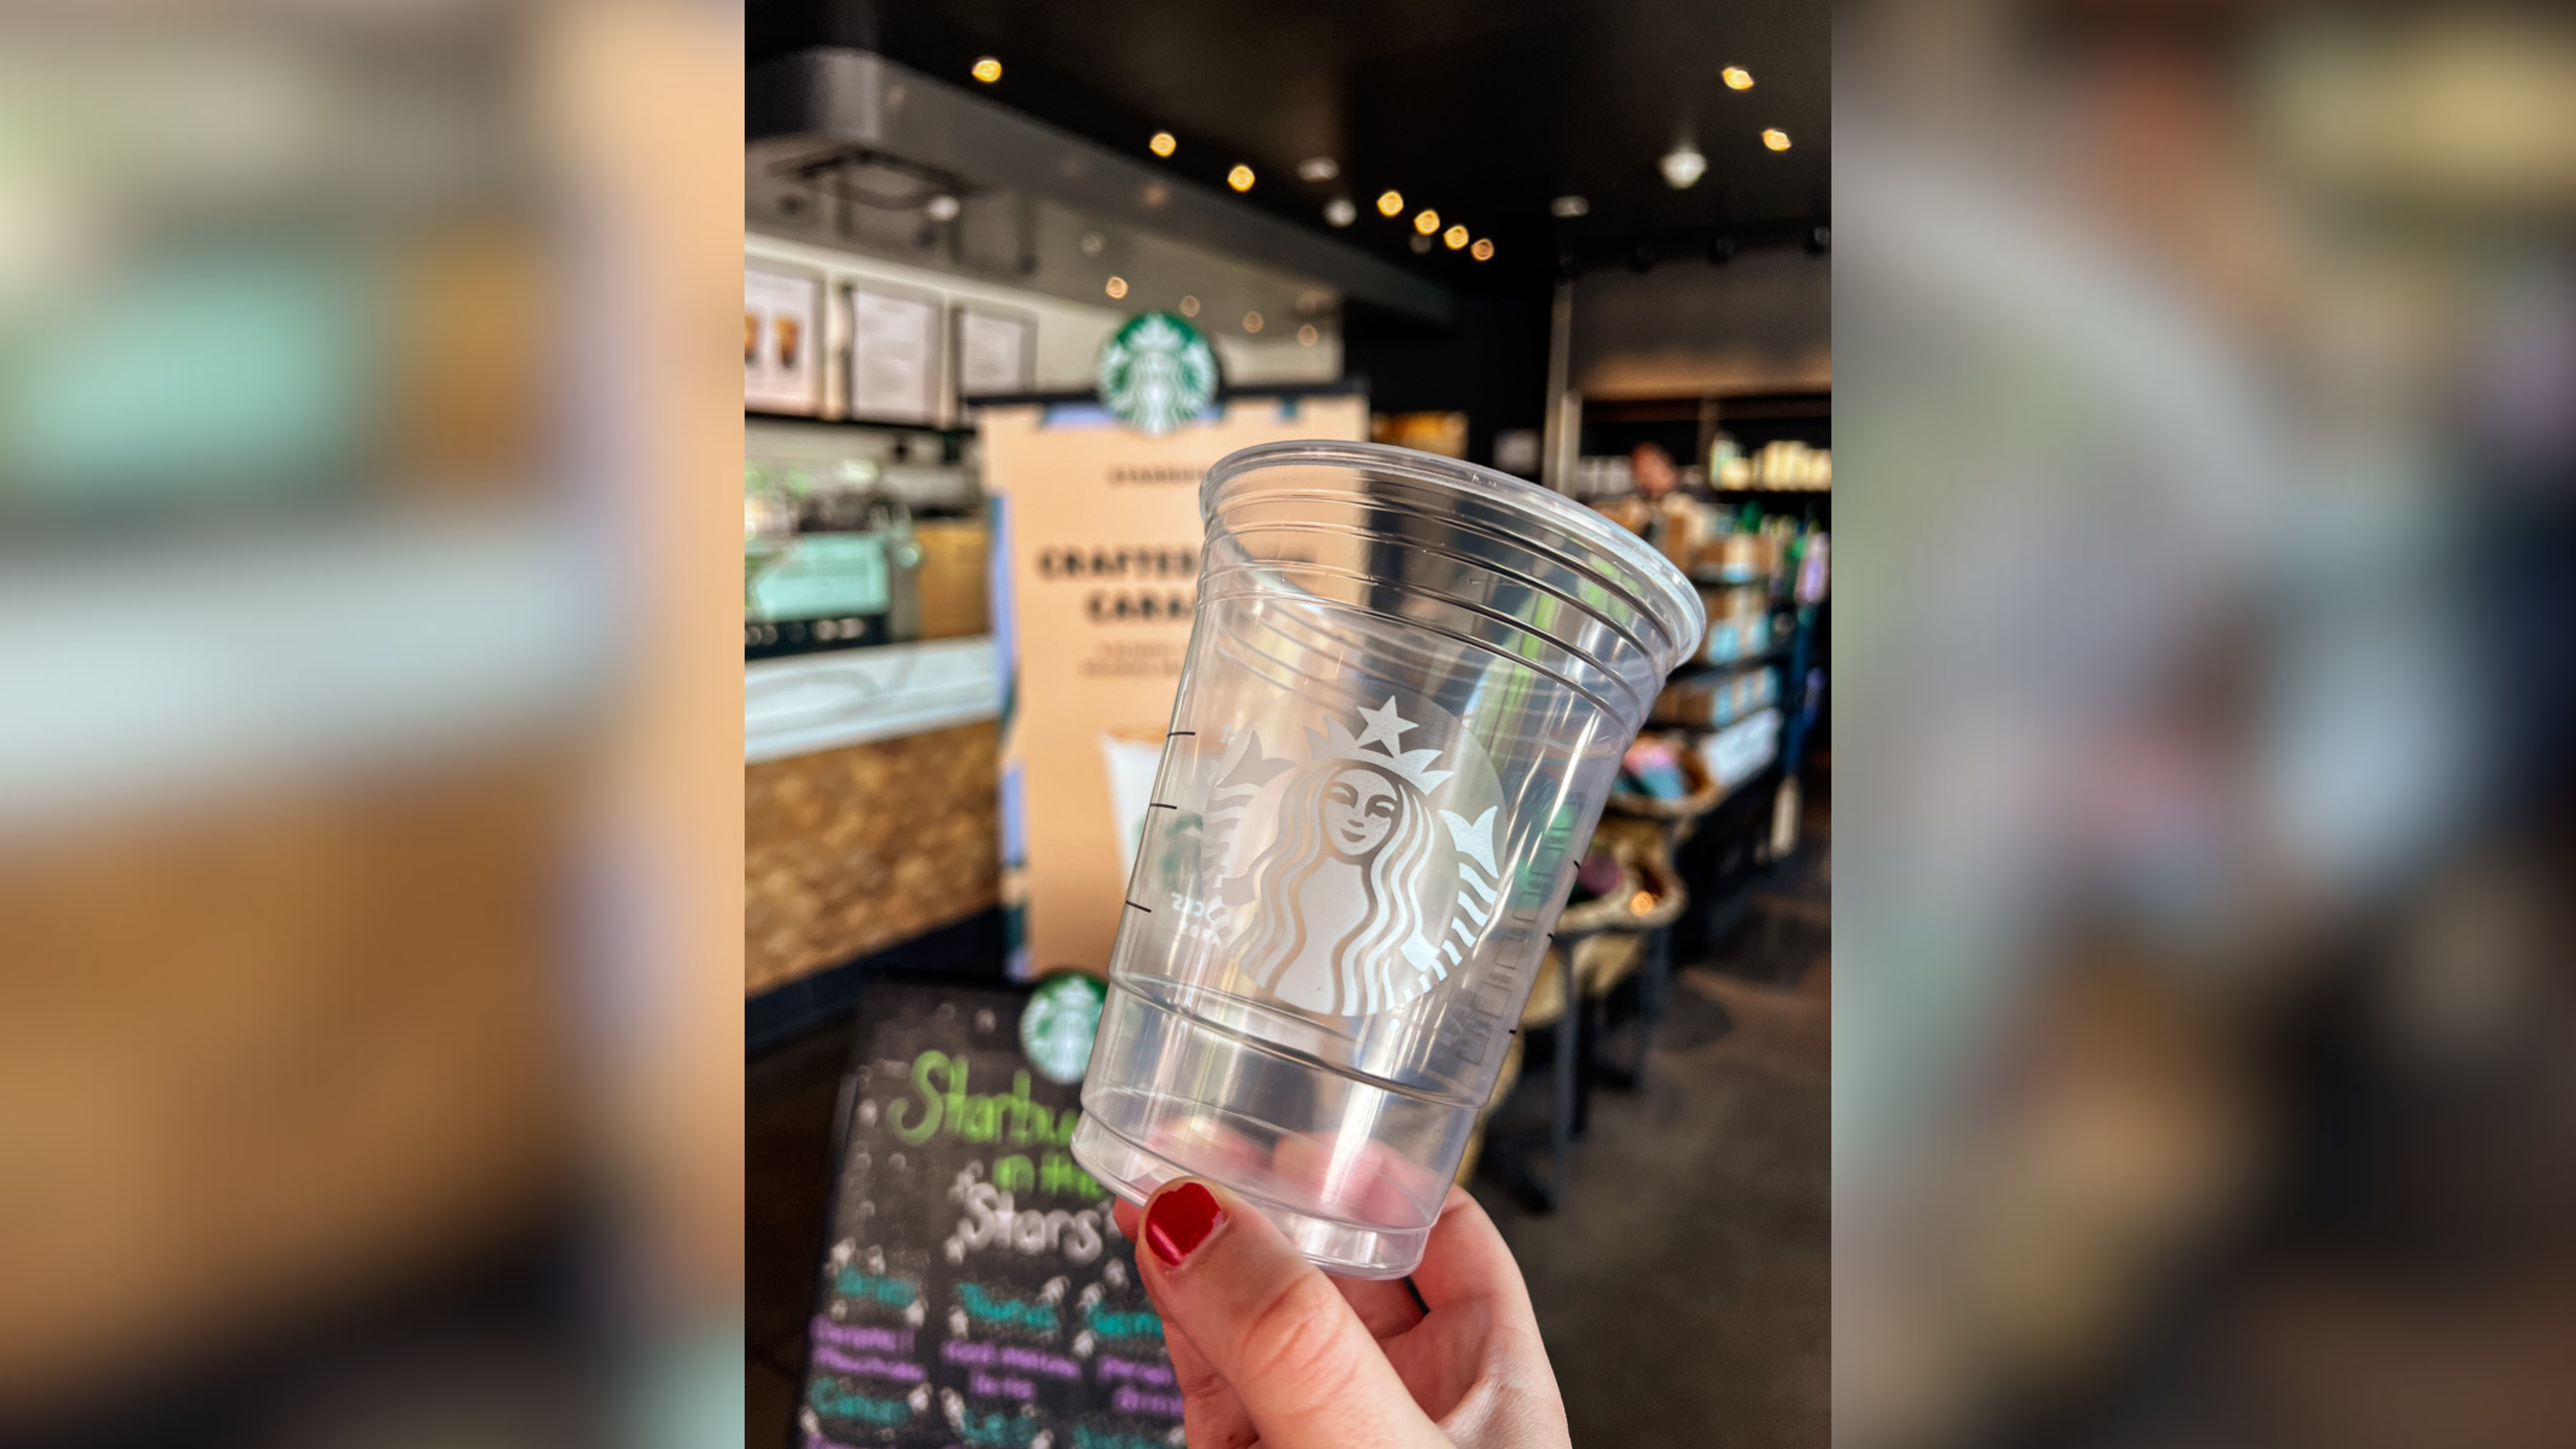 Close up of a plastic Starbucks cup being held inside of a Bethlehem, PA Starbucks